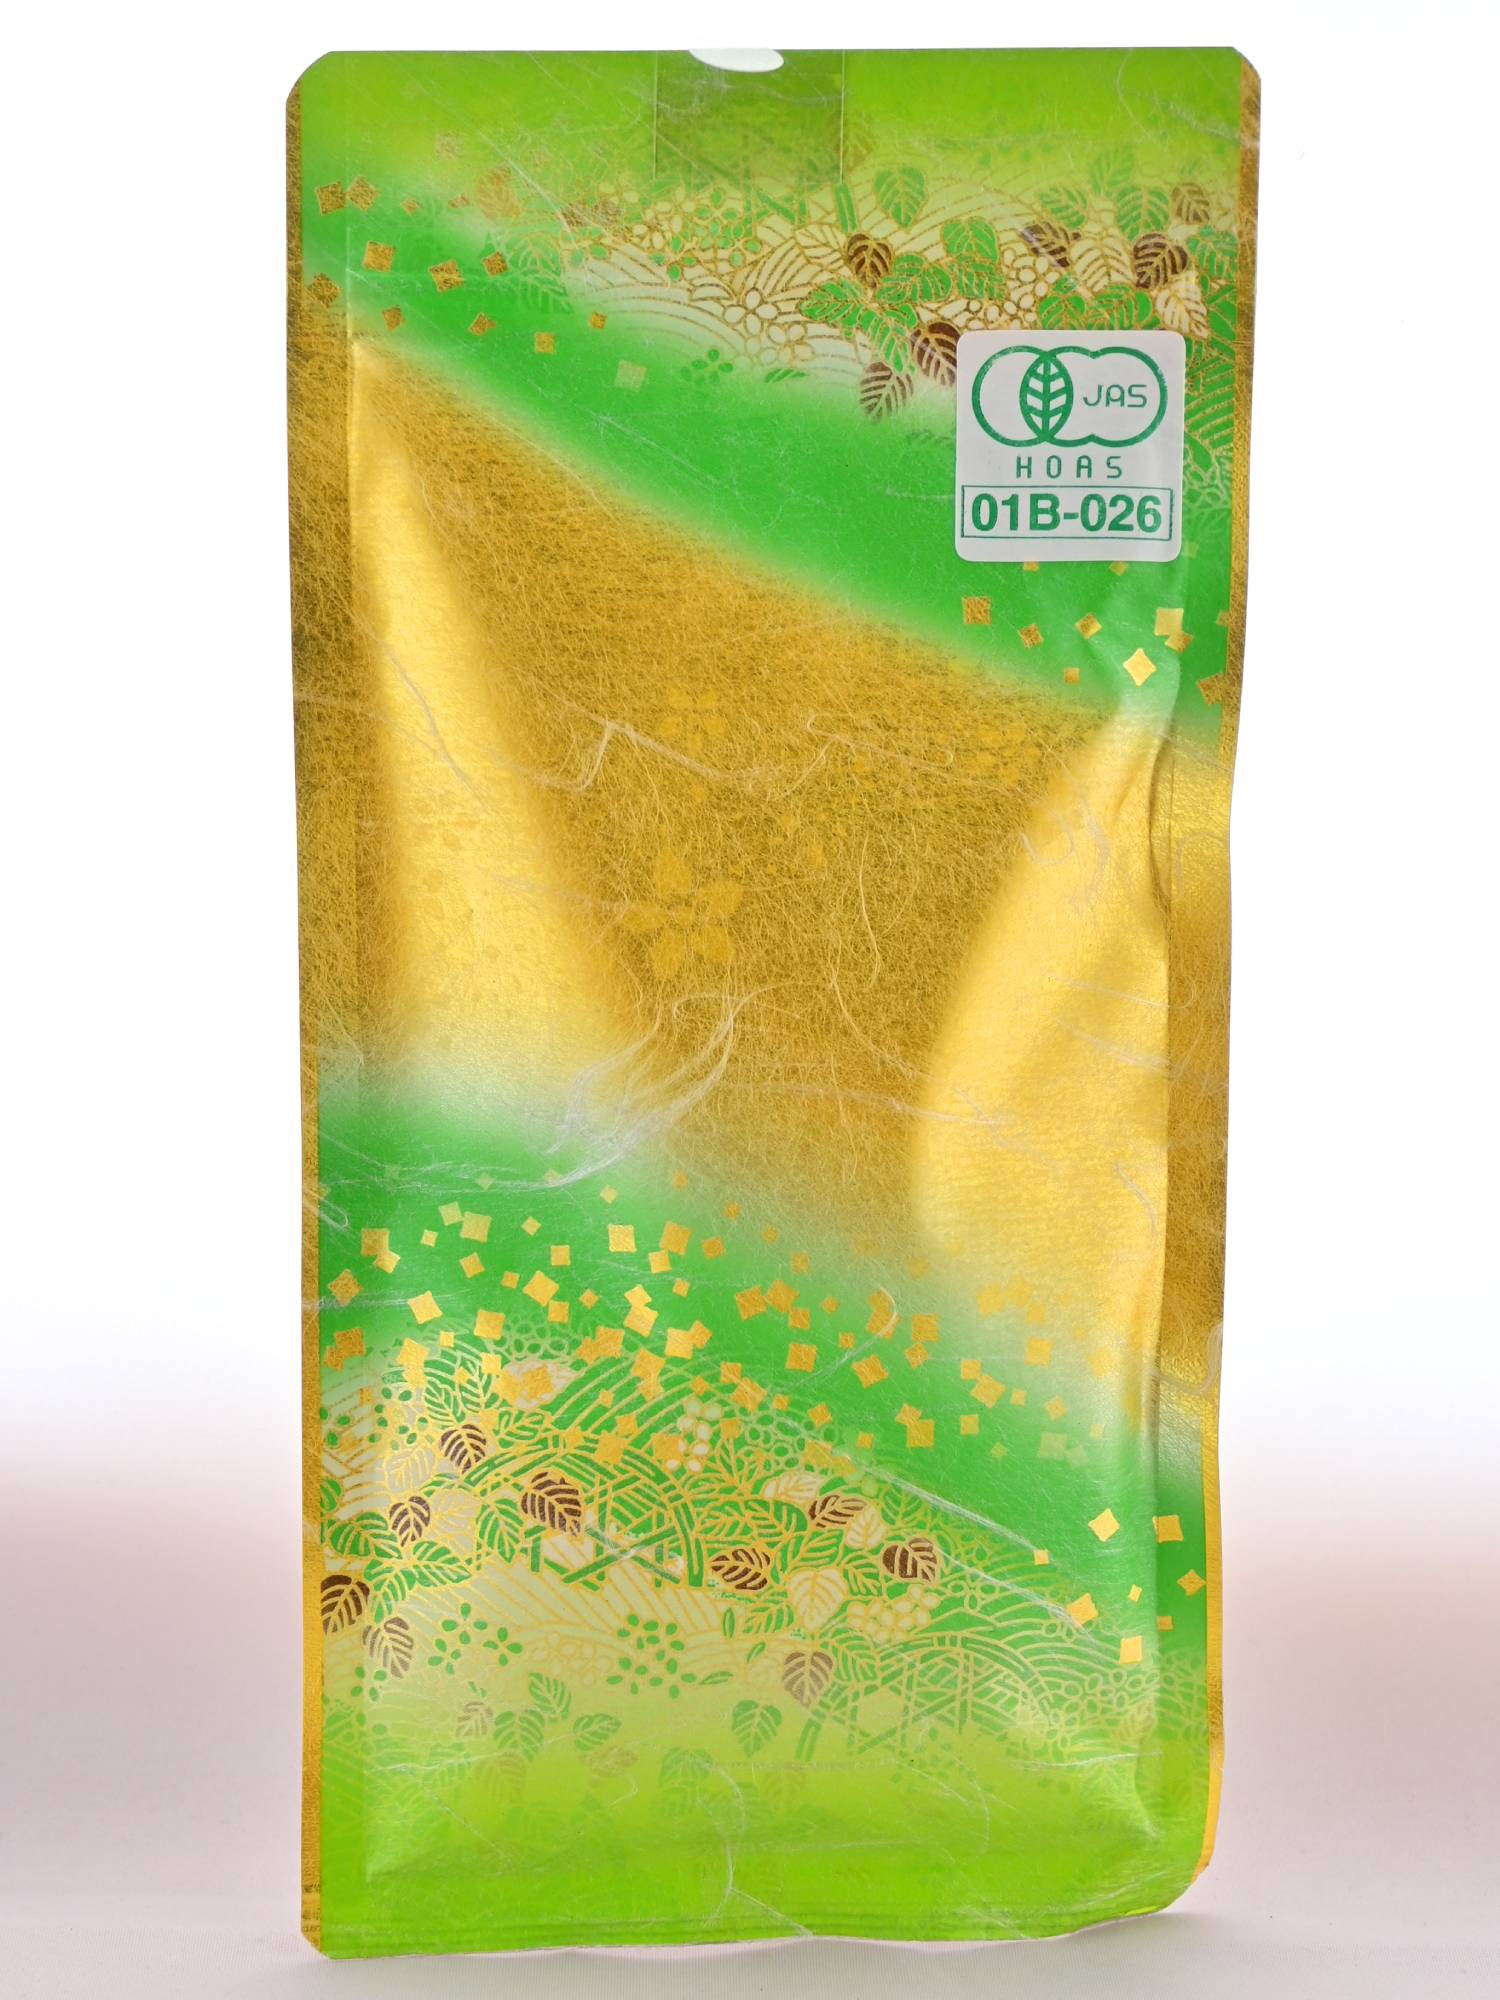 The plastic Gyokuro package is predominantly green, with gold pine tree detailing and a downward angled slash of gold through the middle. In the top right corner is a lot certification sticker.